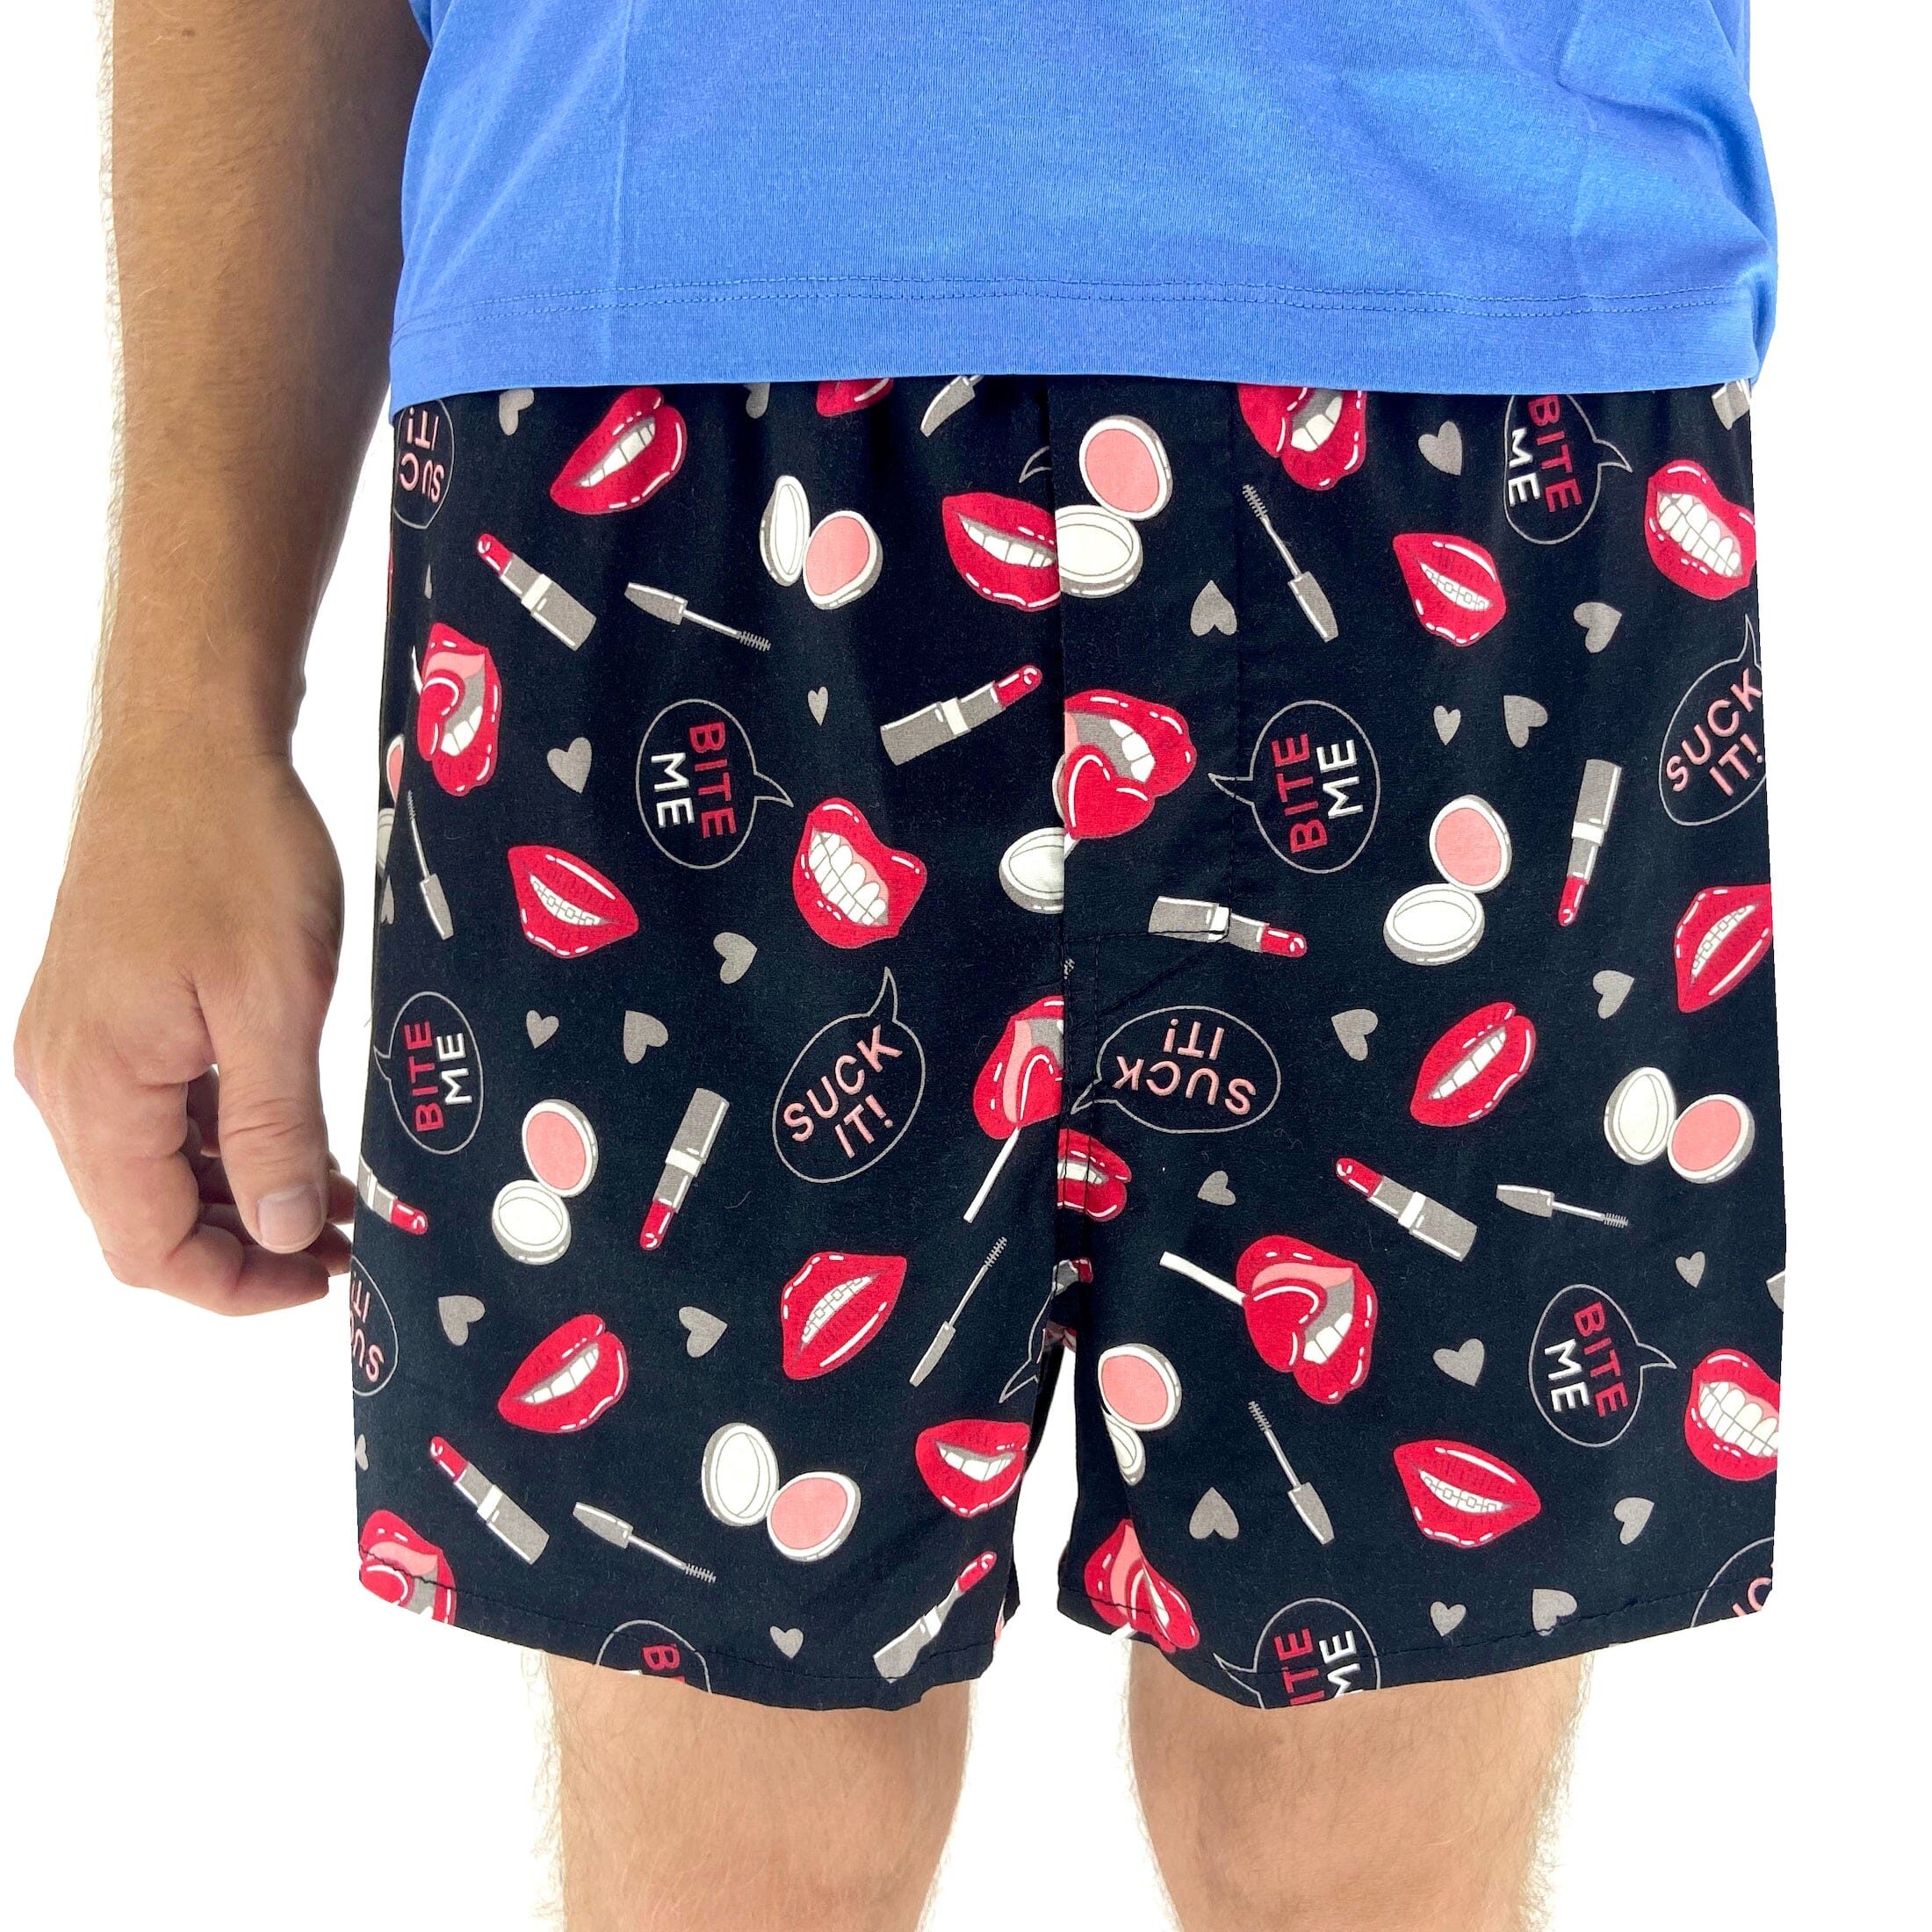 CHICTRY Men's Red Lips Print Classic Silk Boxer Shorts Underwear